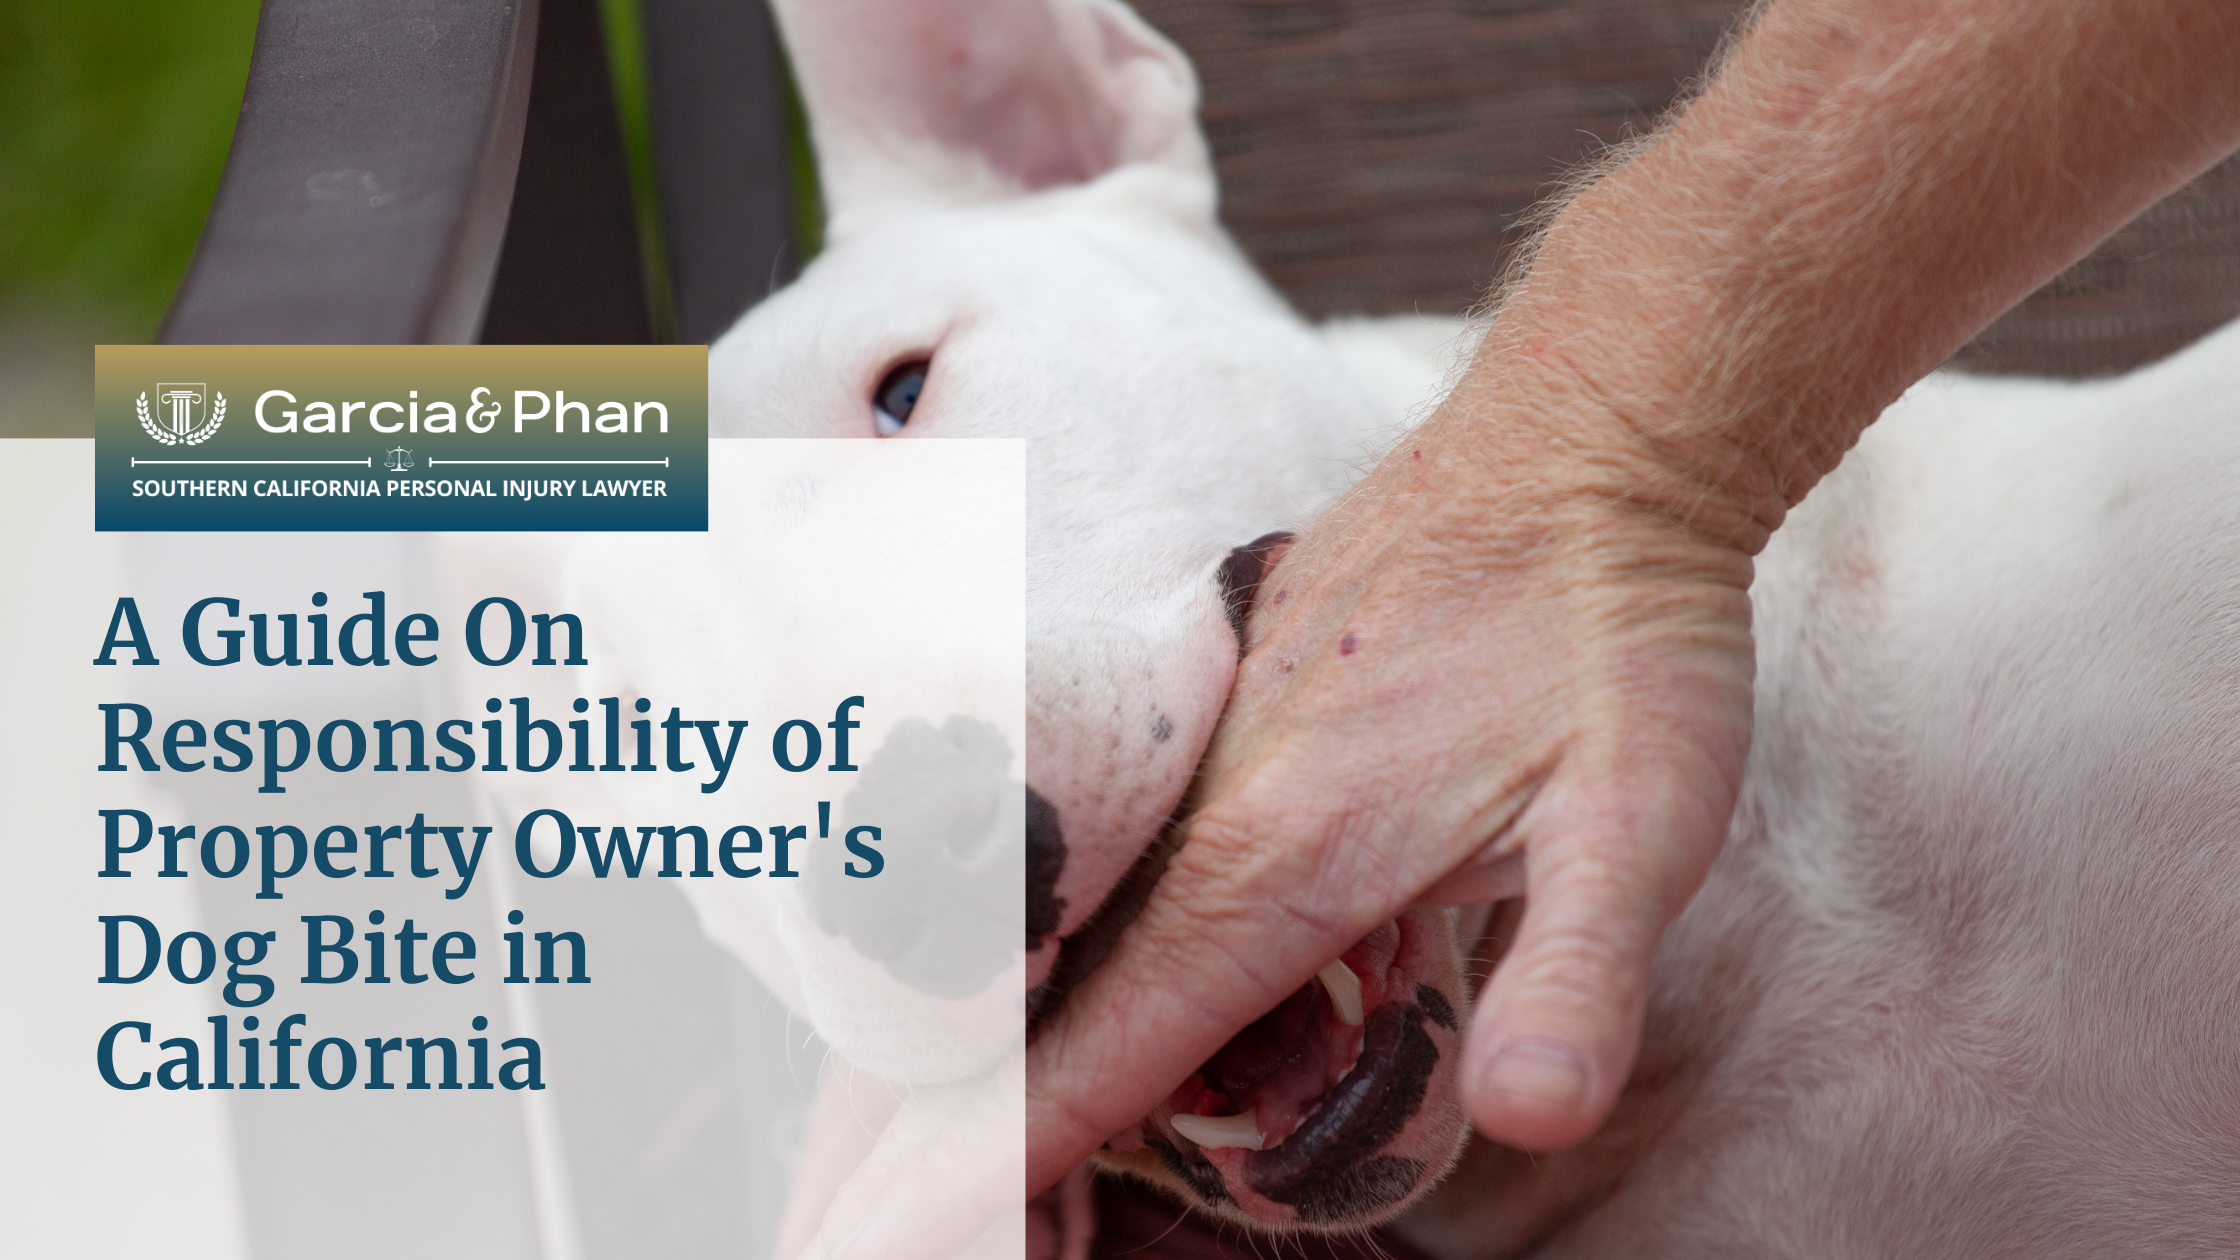 A Guide On Responsibility of Property Owner's Dog Bite in California | GP